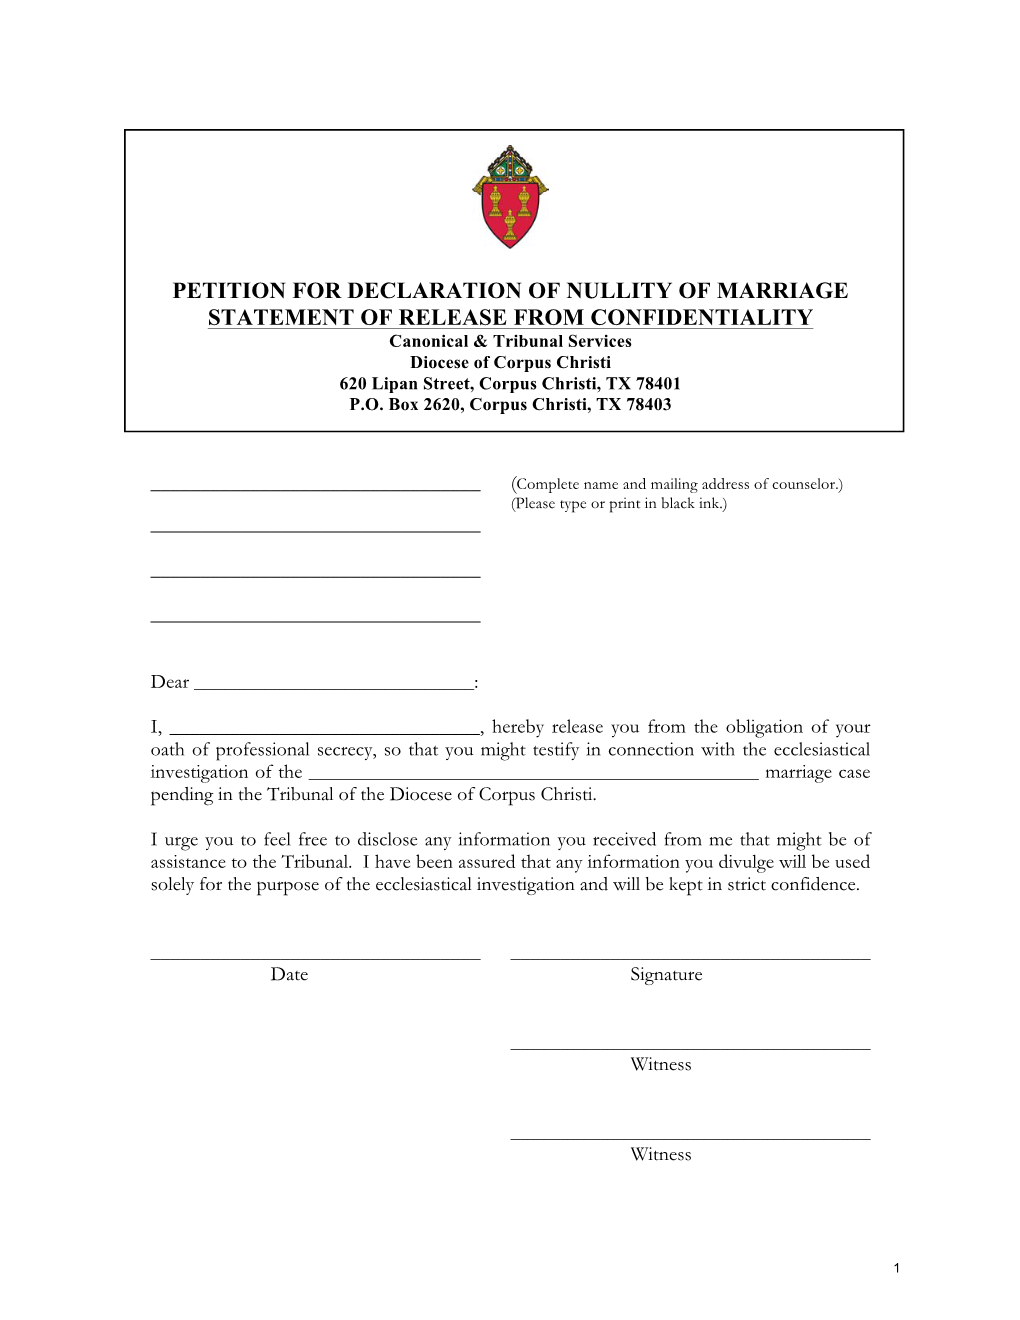 Petition for Declaration of Nullity of Marriage